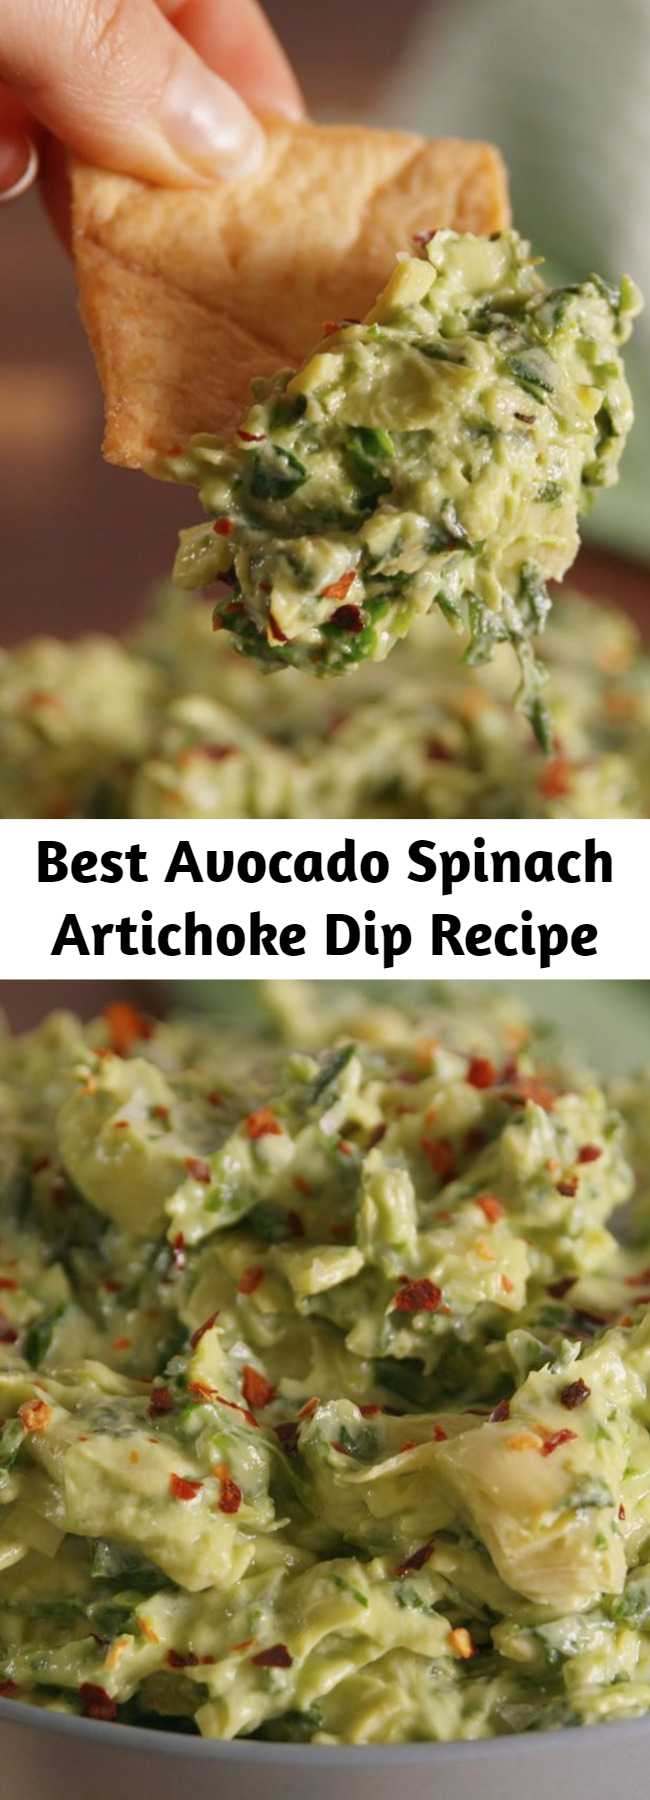 Best Avocado Spinach Artichoke Dip Recipe - Adding avocado to spinach artichoke dip is seriously life changing. The avocado adds such amazing flavor to the classic dip.